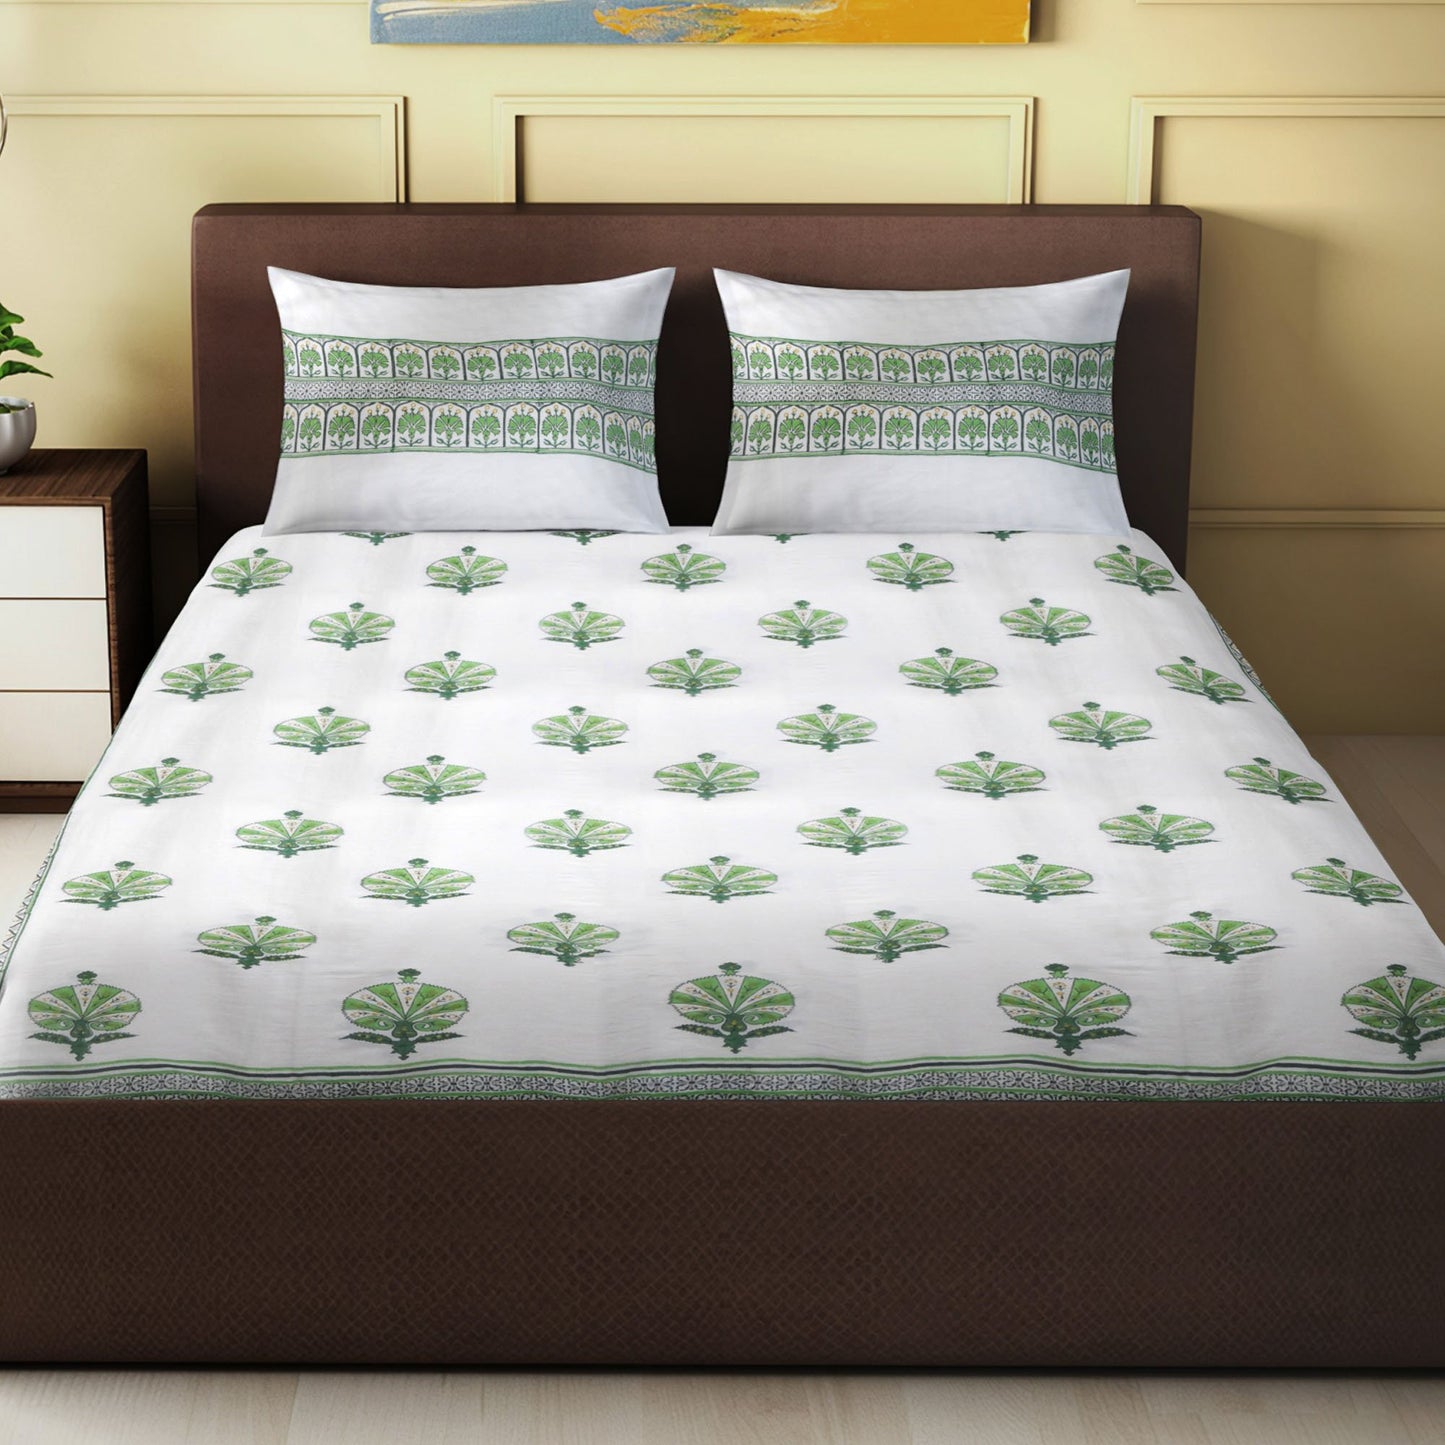 Nakshi 100% Handmade  Ethnic pattern sanganeri Block Print King Size Bedsheets comes  with 2 Pillow covers.